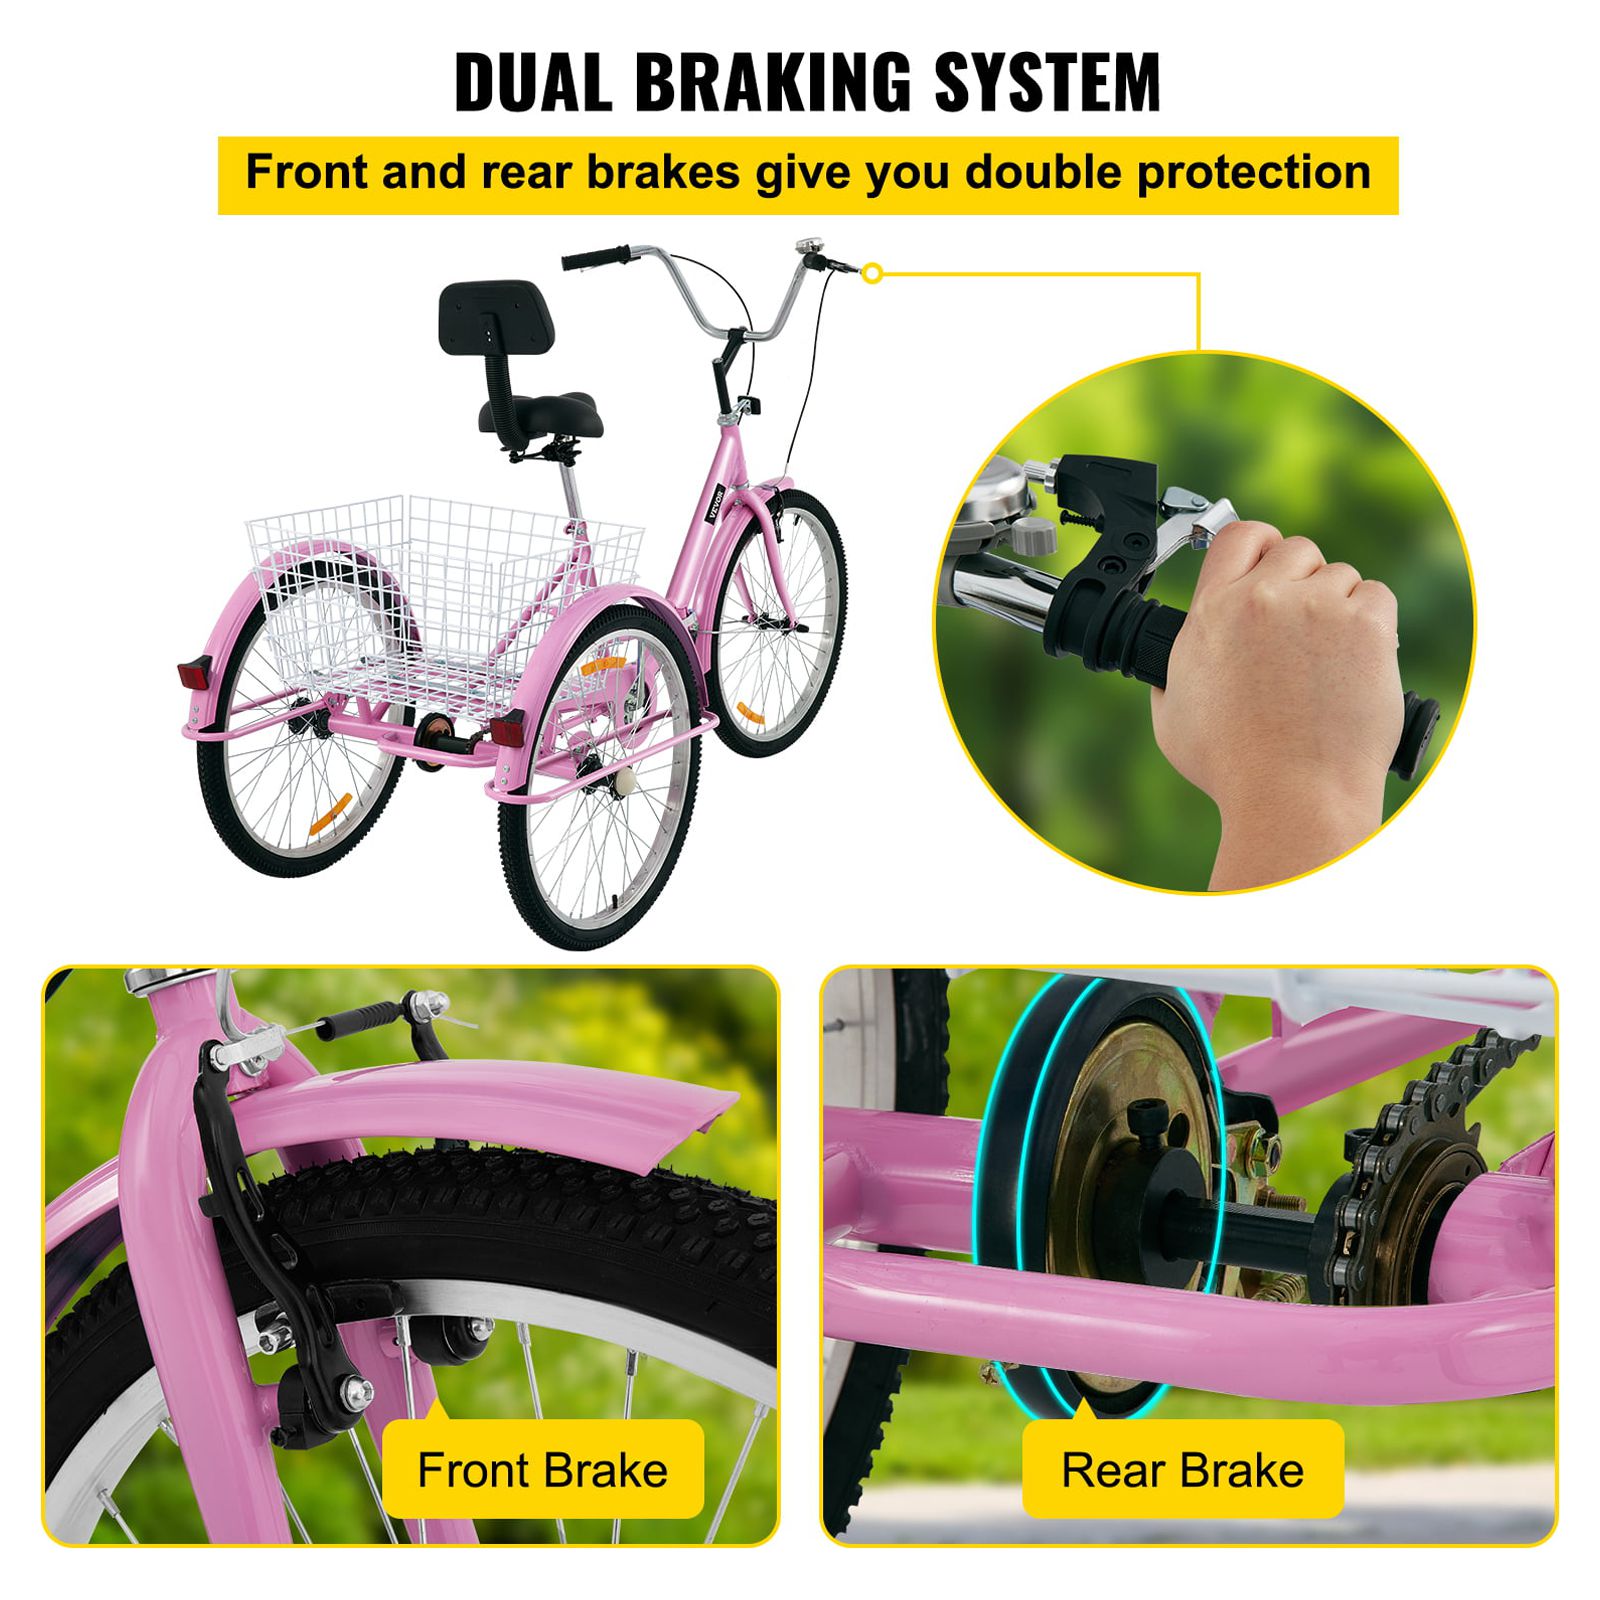 VEVOR Foldable Adult Tricycle 24 Wheels, 1-Speed Pink Trike, 3 Wheels Colorful Bike with Basket, Portable and Foldable Bicycle for Adults Exercise Shopping Picnic Outdoor Activities - image 5 of 9